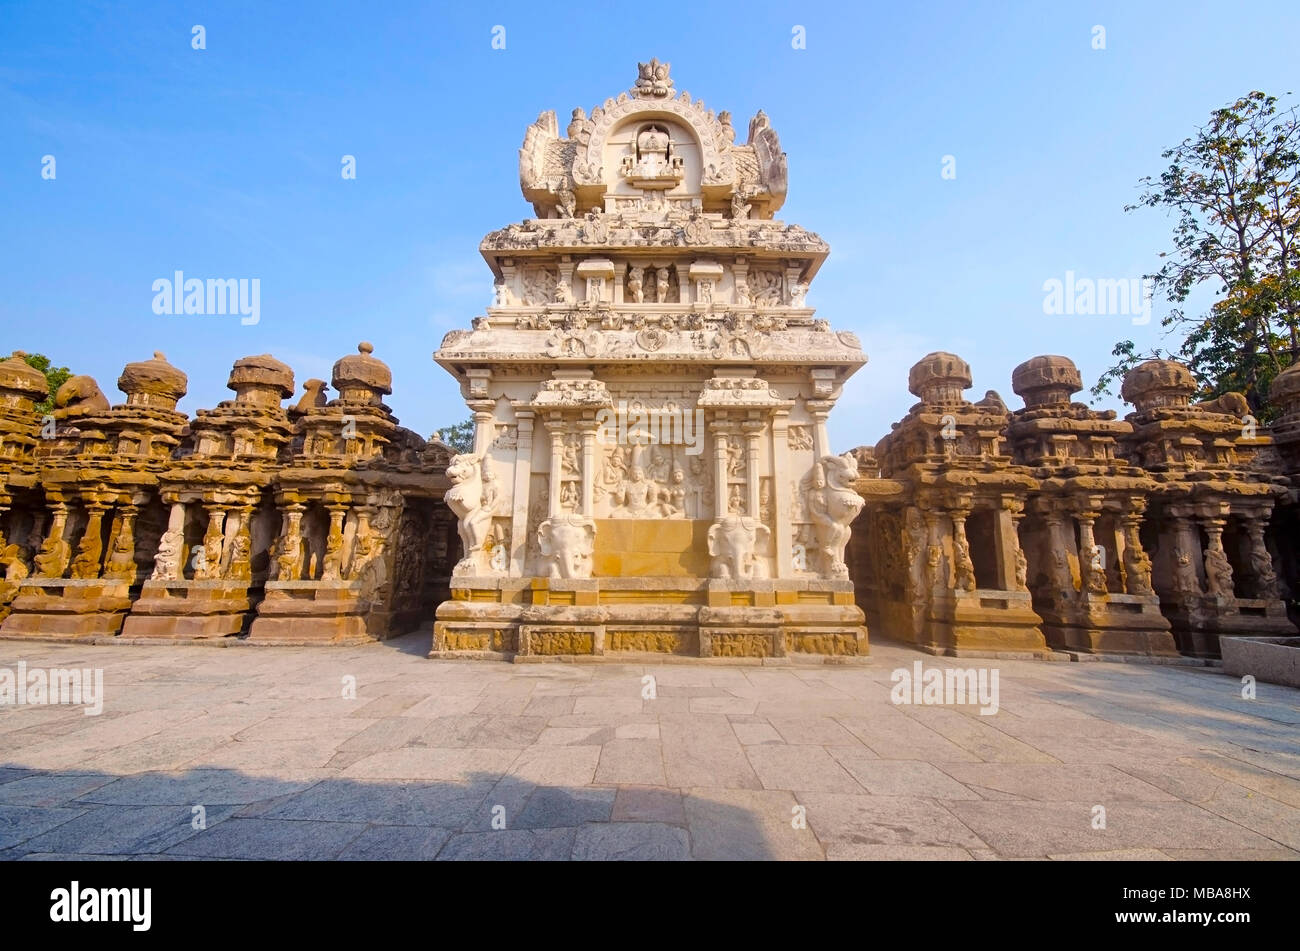 Outer view of Kanchi Kailasanathar temple Kanchipuram, Tamil Nadu, India. Hindu temple in Dravidian architectural style, dedicated to the Lord Shiva Stock Photo